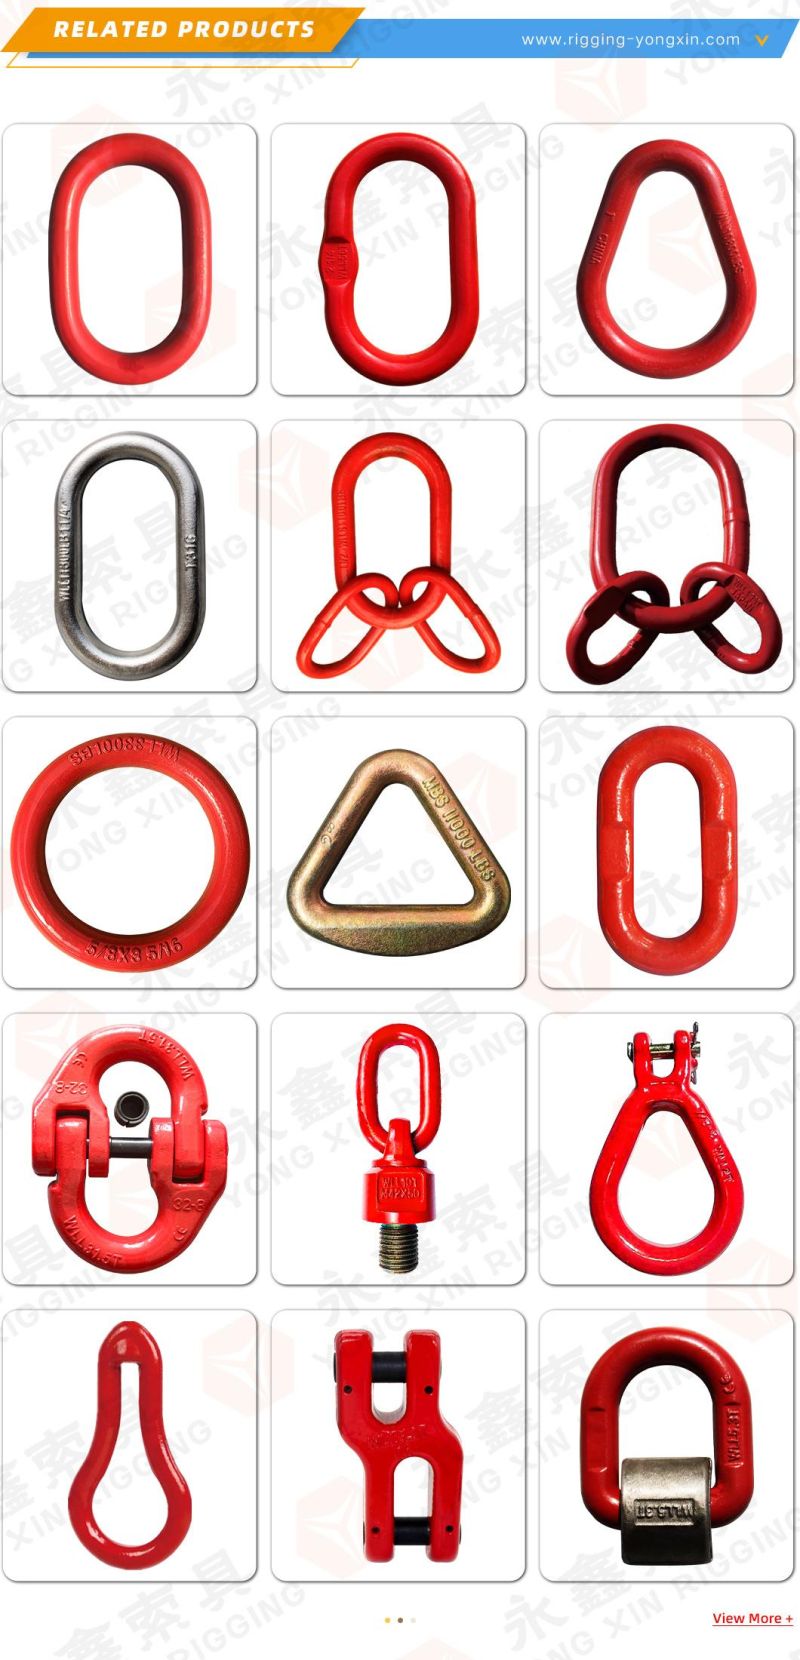 Yongxin Rigging Hot Sale Wholesale High Quality G80 Chain Alloy Steel Connection Master Link Assembly